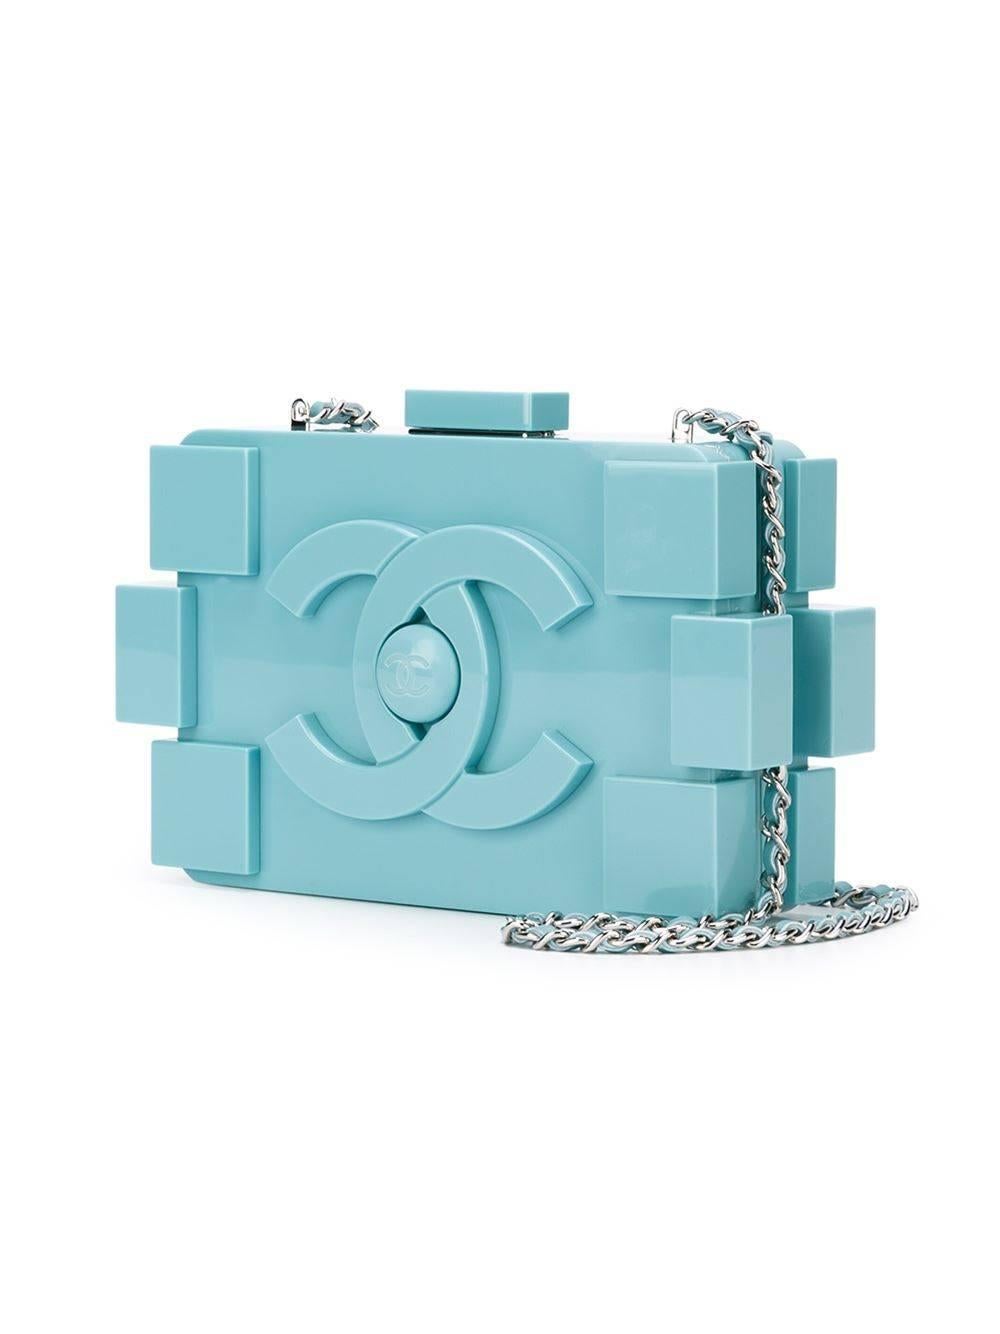 Baby blue plexiglass 'Boy Brick' clutch featuring a push lock fastening, a front centre logo stamp, a rectangular body, a silver-tone chain shoulder strap, an internal zipped pocket and an internal logo stamp. 

Colour: Baby Blue

Material: